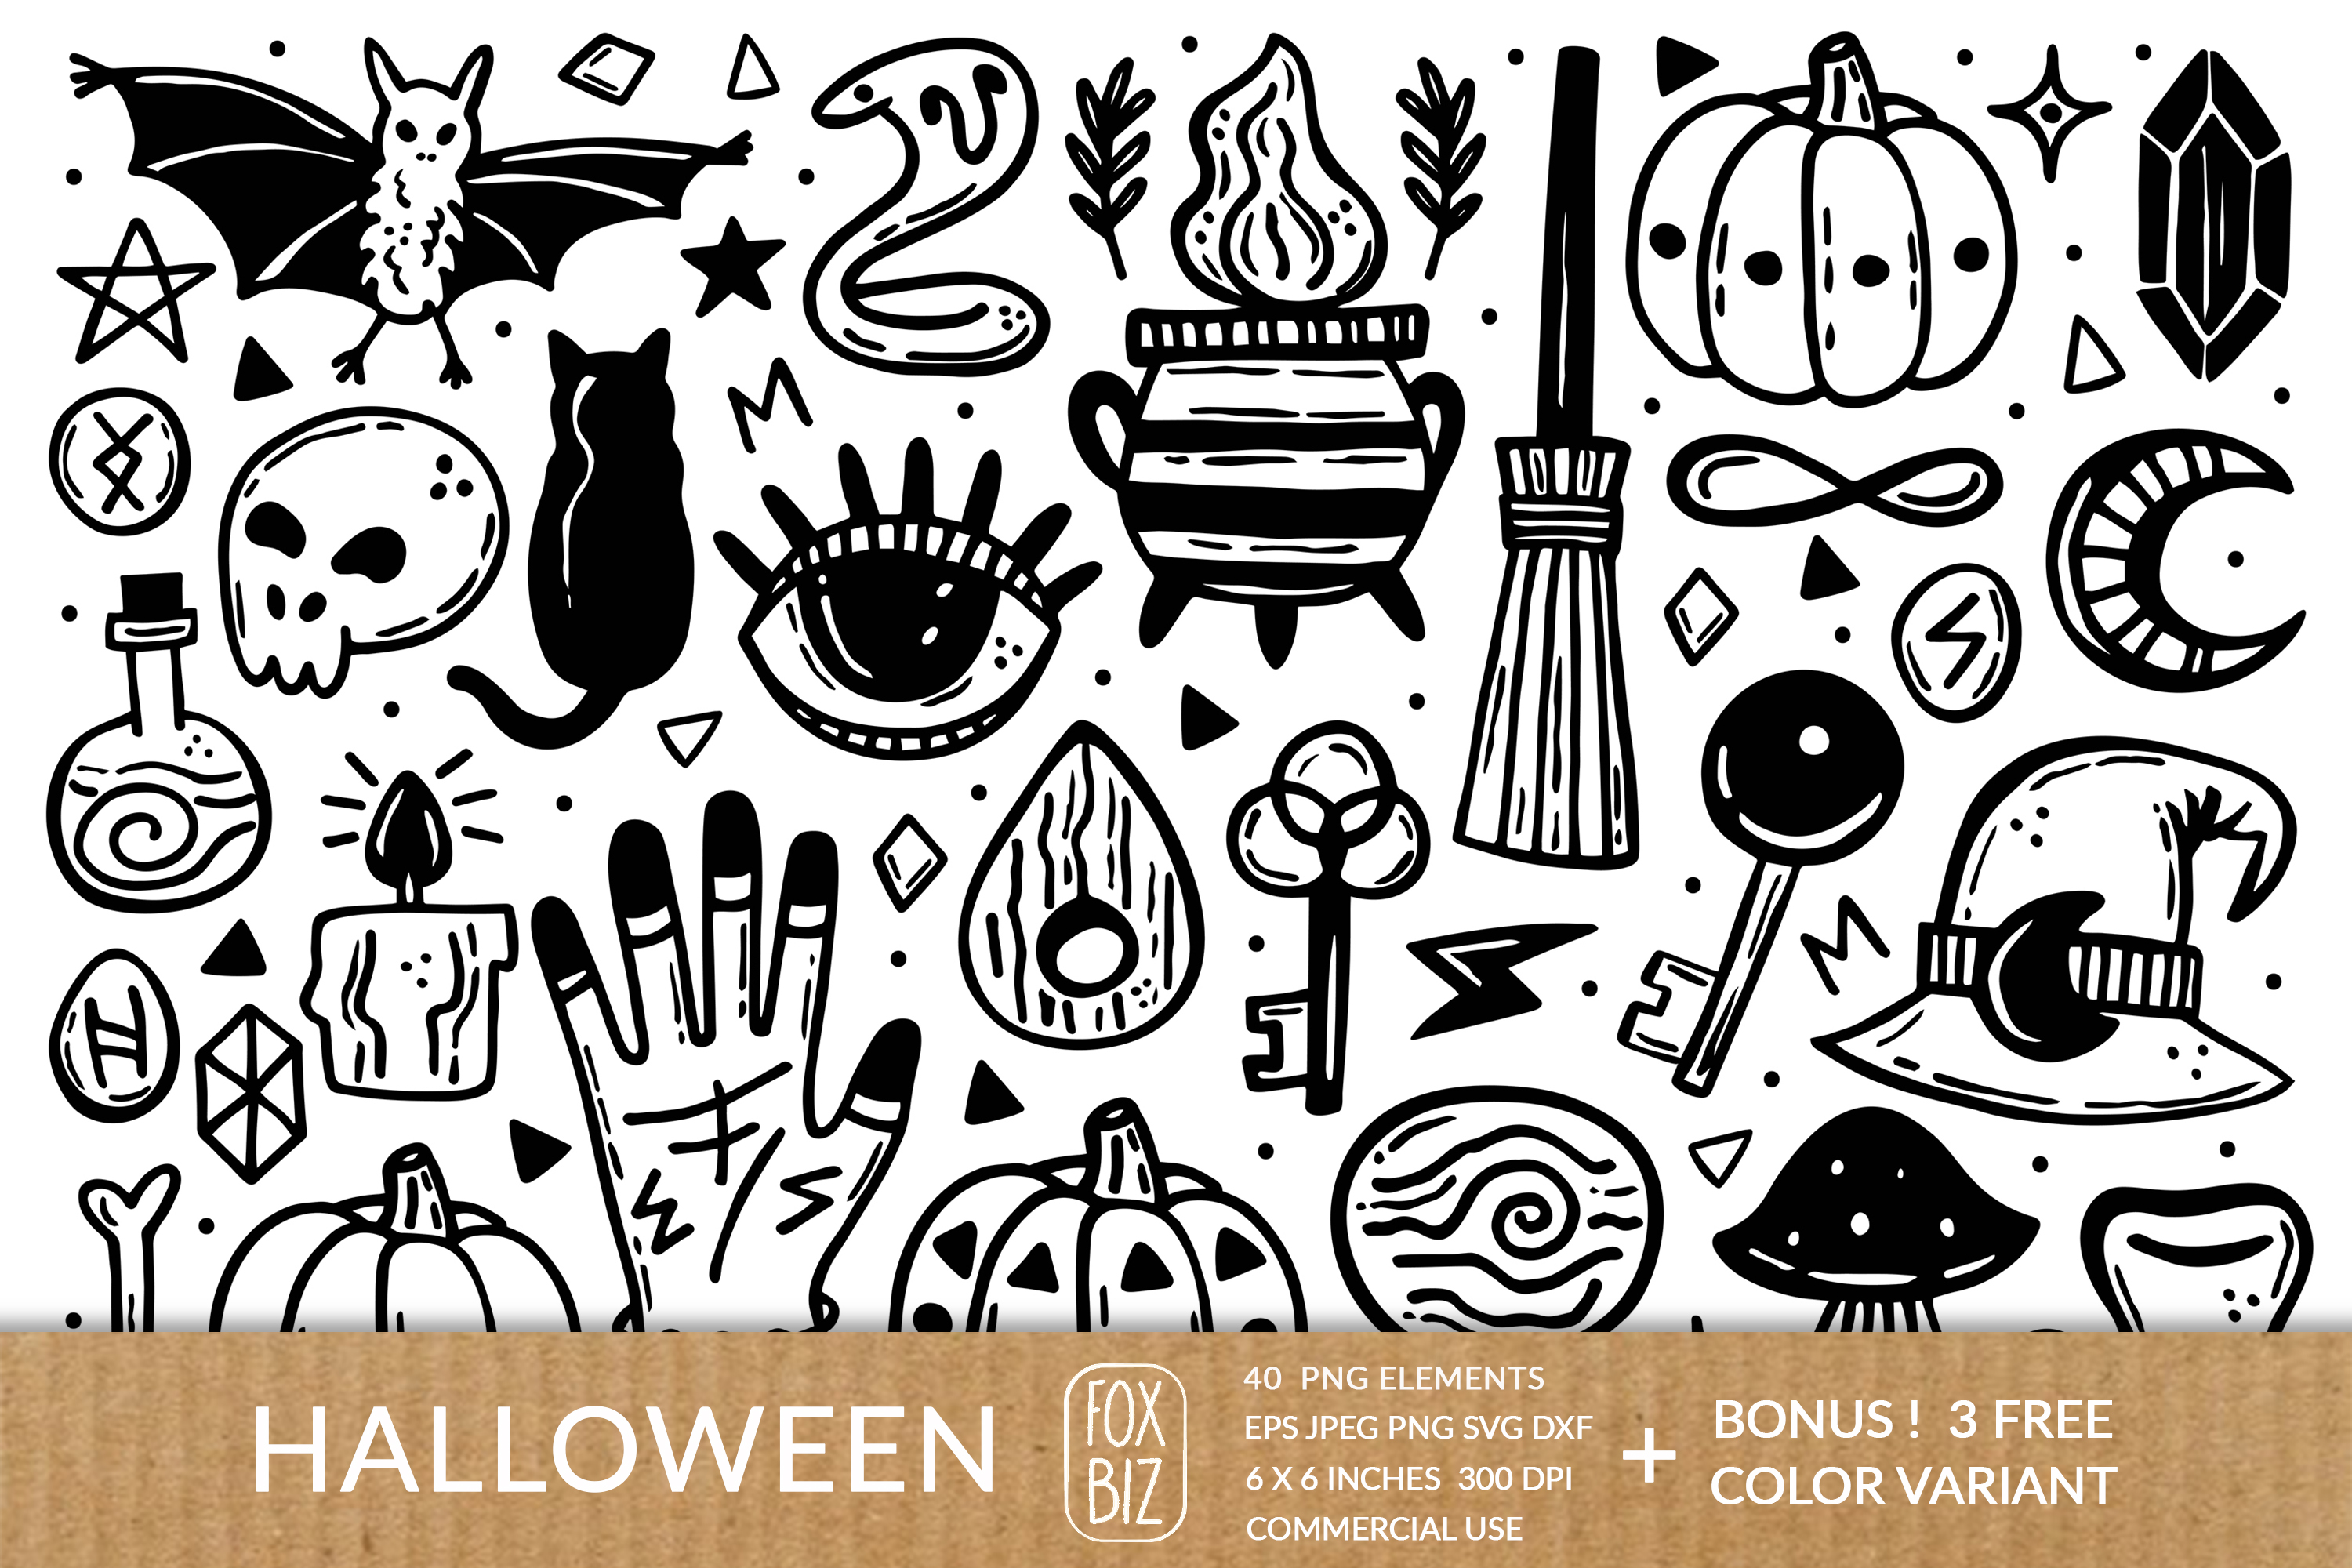 Download Ink Halloween Graphic By Foxbiz Creative Fabrica PSD Mockup Templates